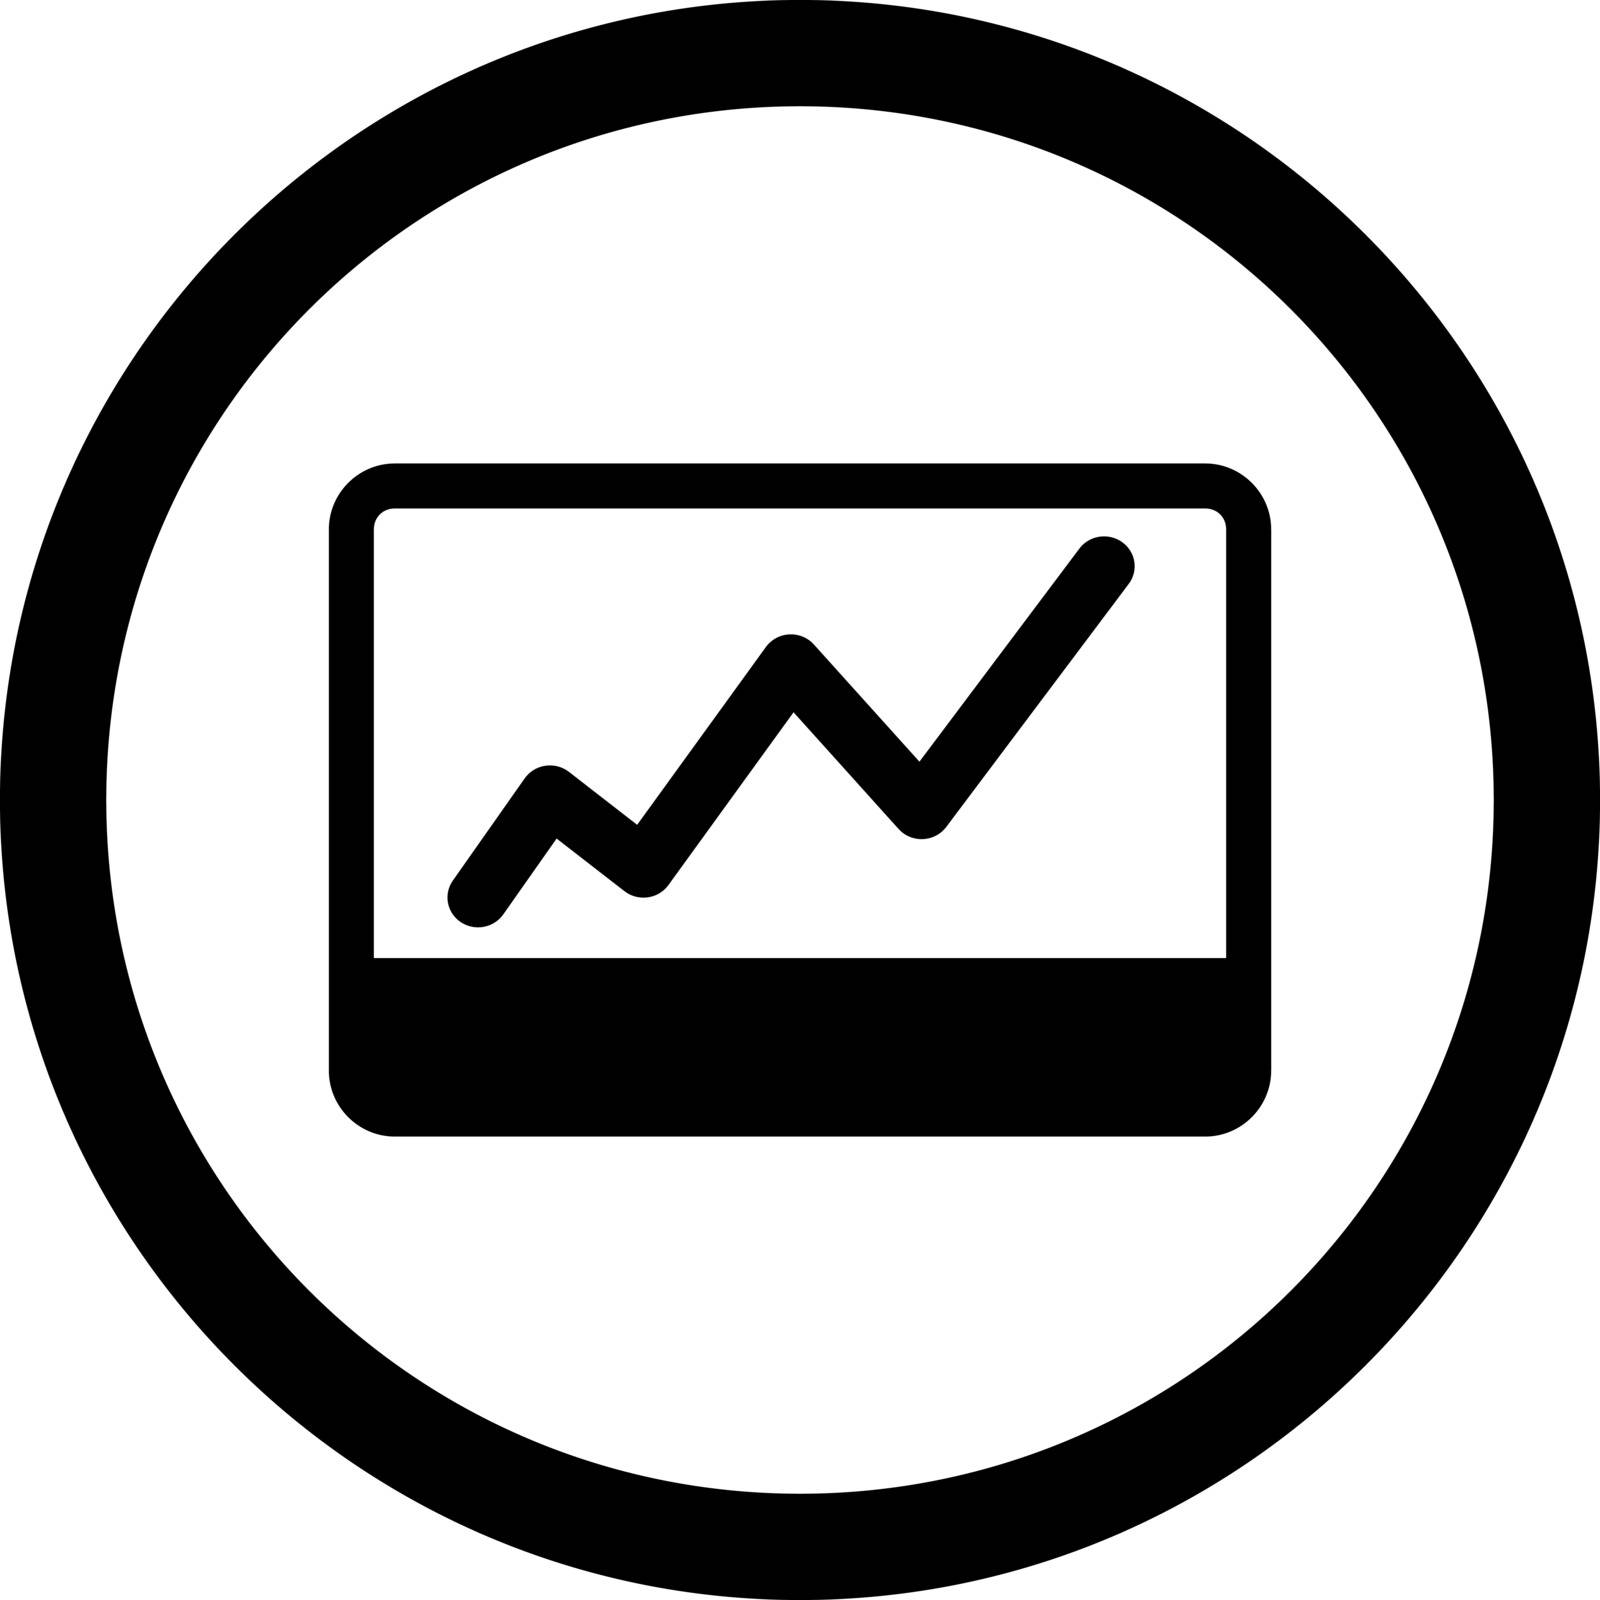 Stock Market vector icon. This flat rounded symbol uses black color and isolated on a white background.